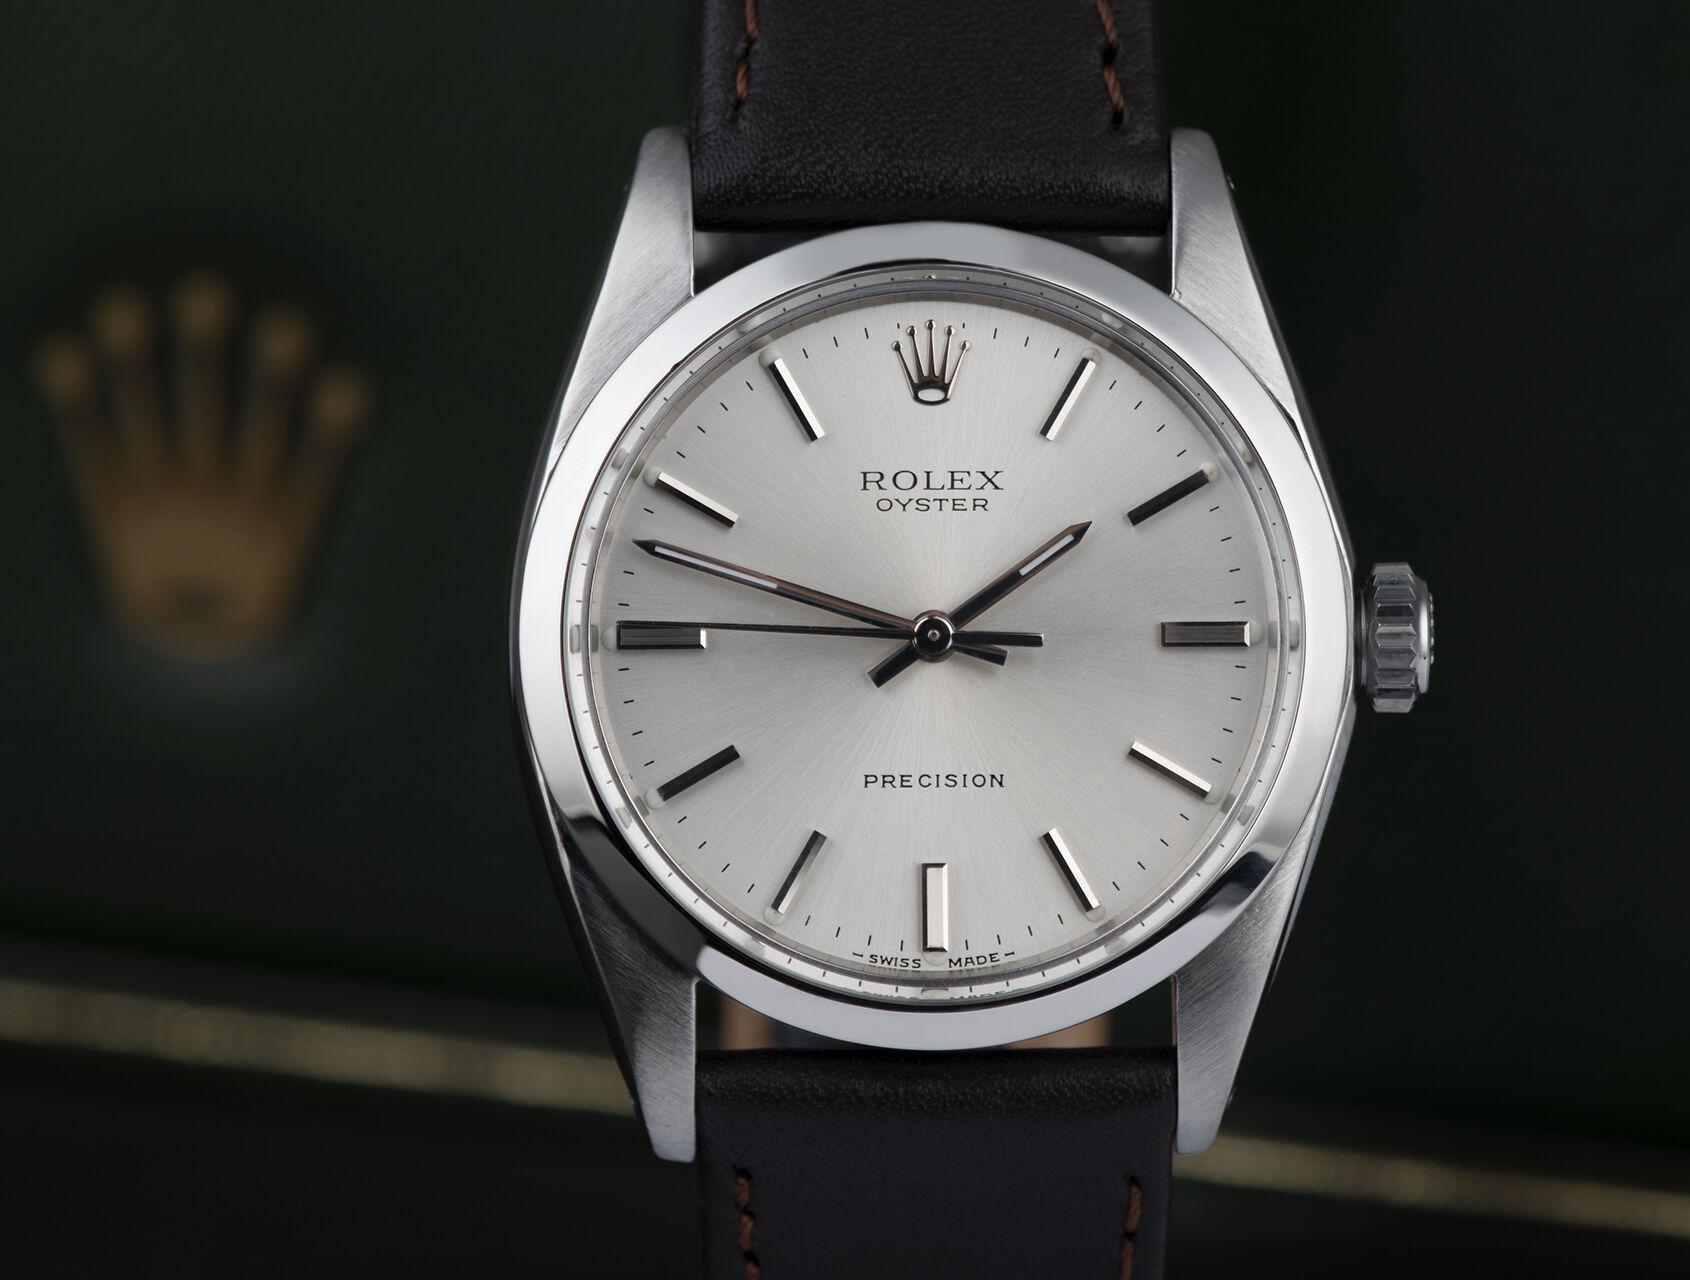 ref 6426 | 'Gents 34mm' | Rolex Oyster Precision